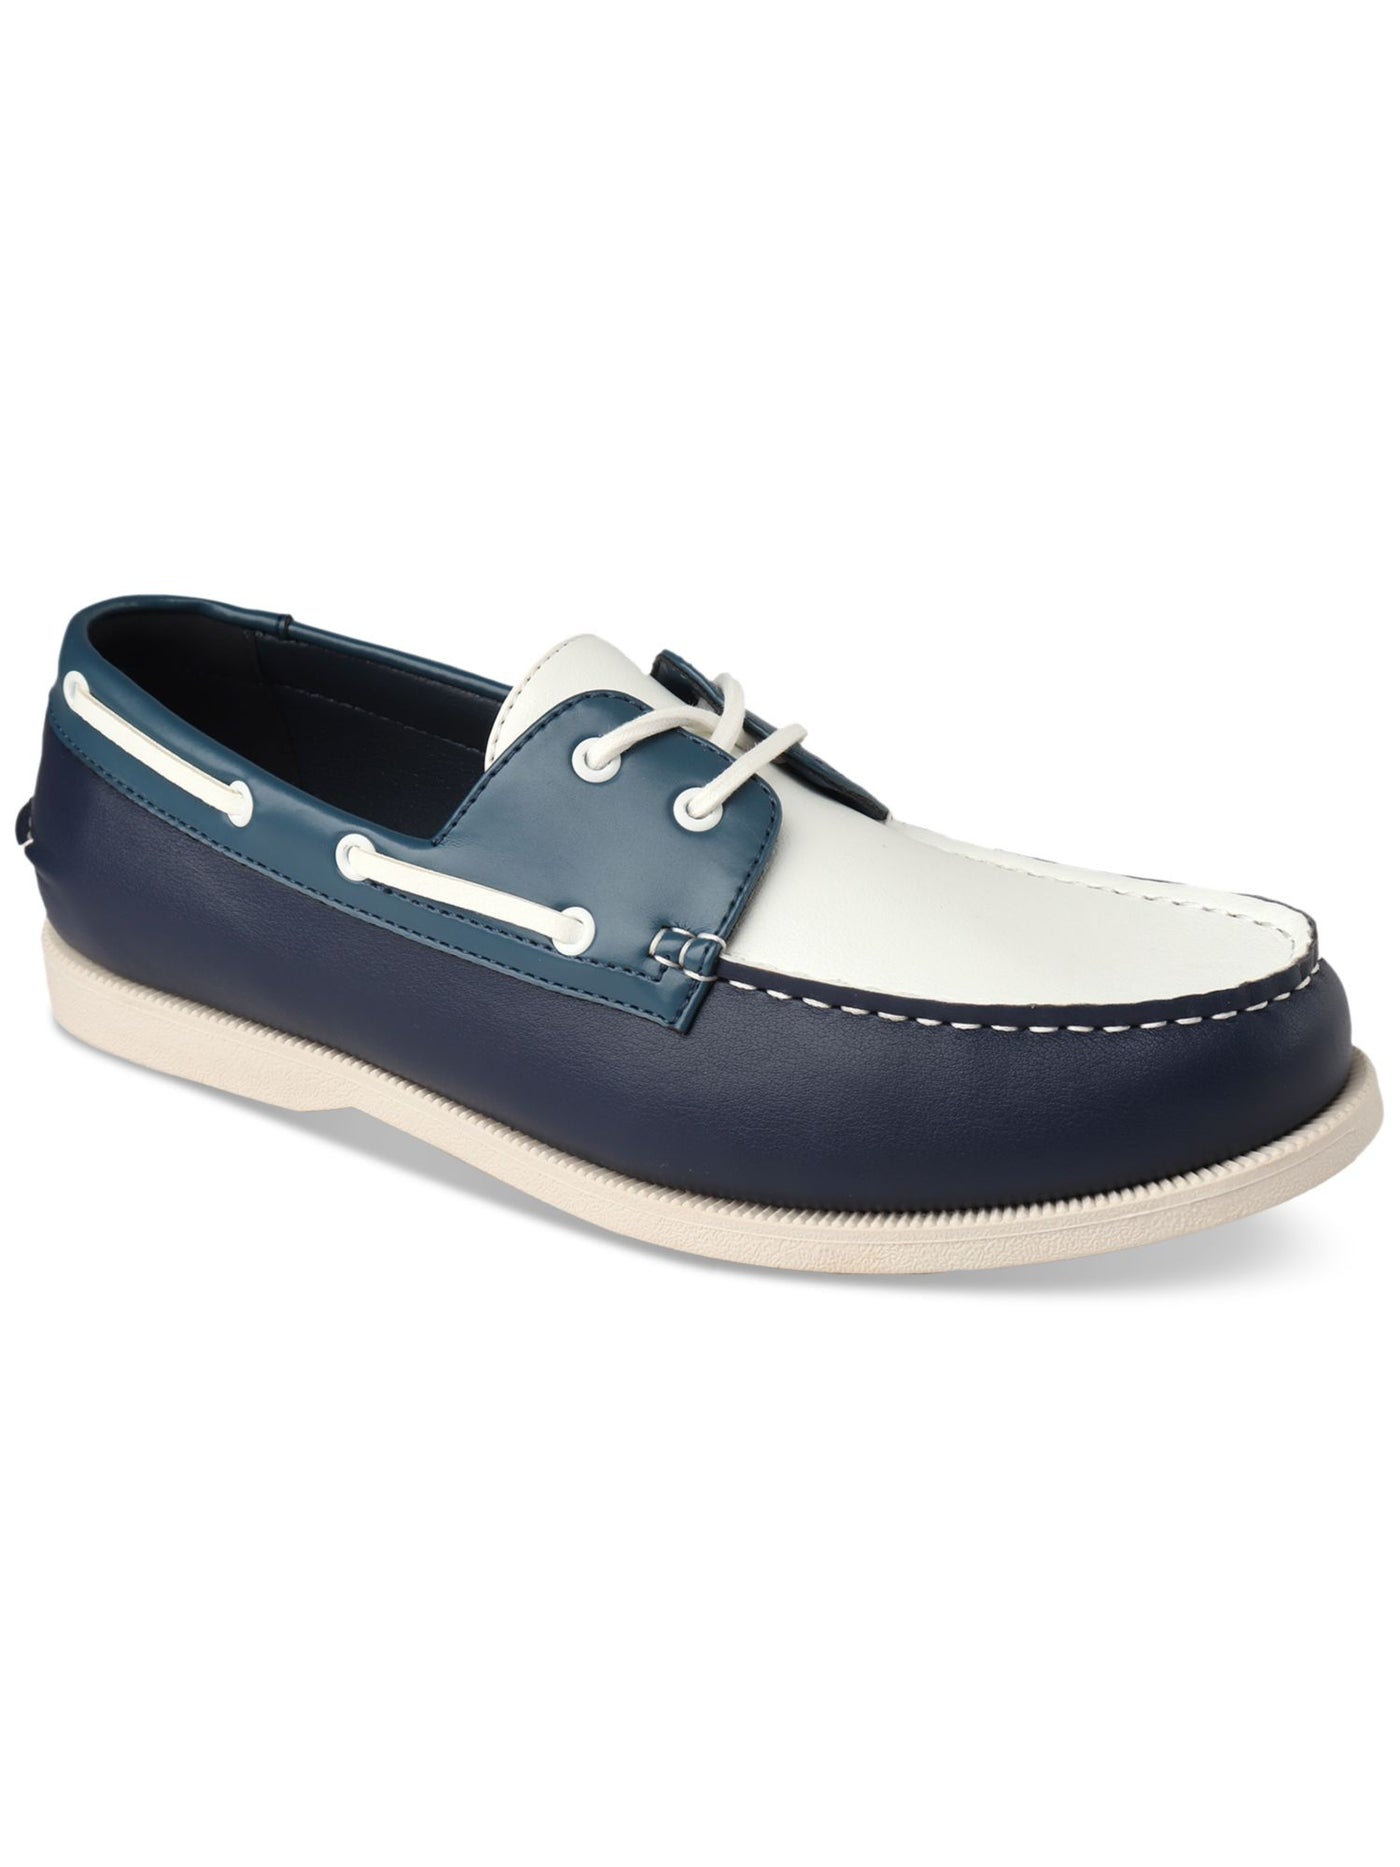 CLUBROOM Mens Navy Moc Toe Comfort Elliot Round Toe Lace-Up Boat Shoes 9.5 M